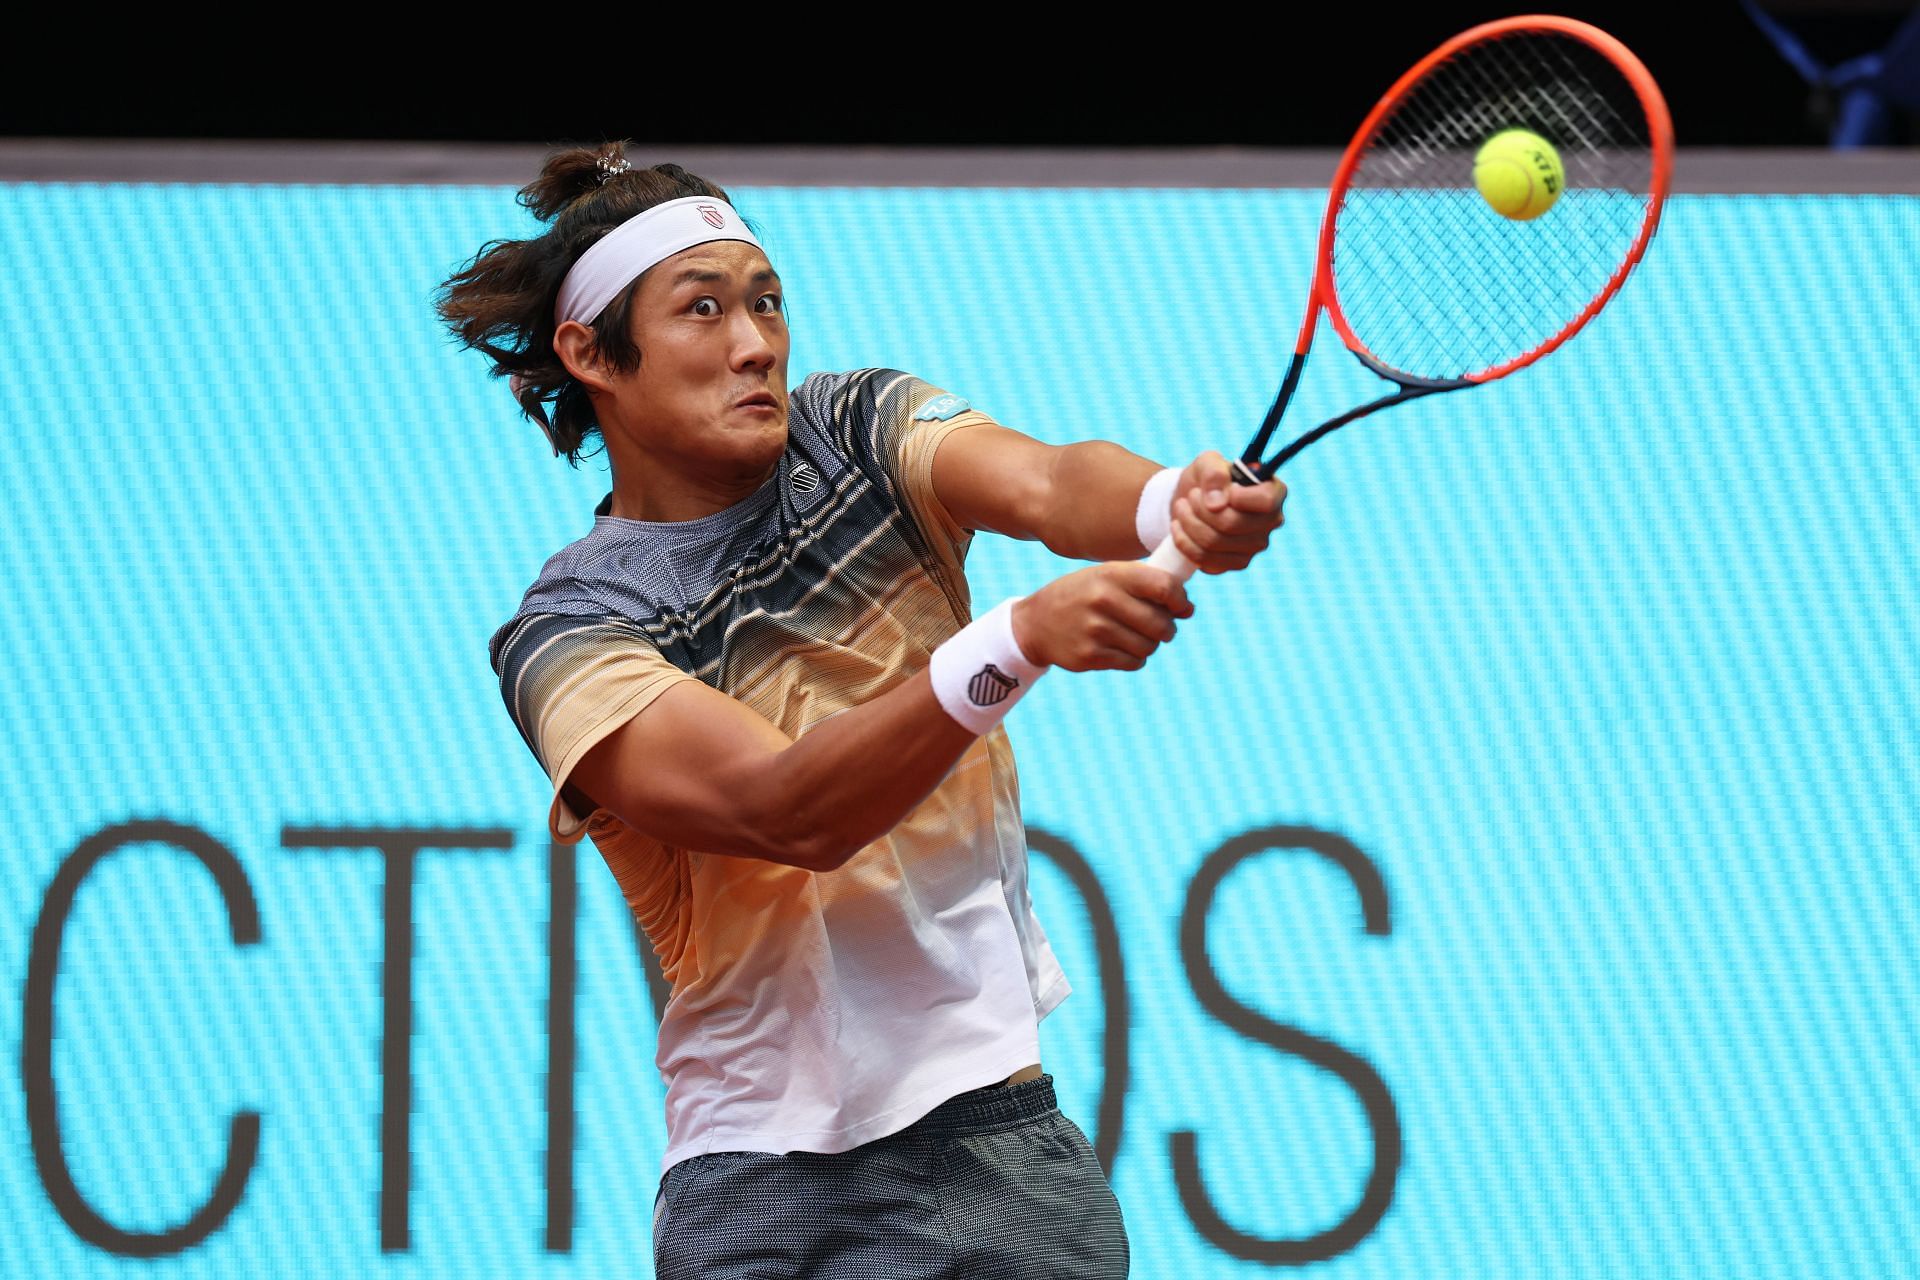 Zhang is having a great run in Madrid.